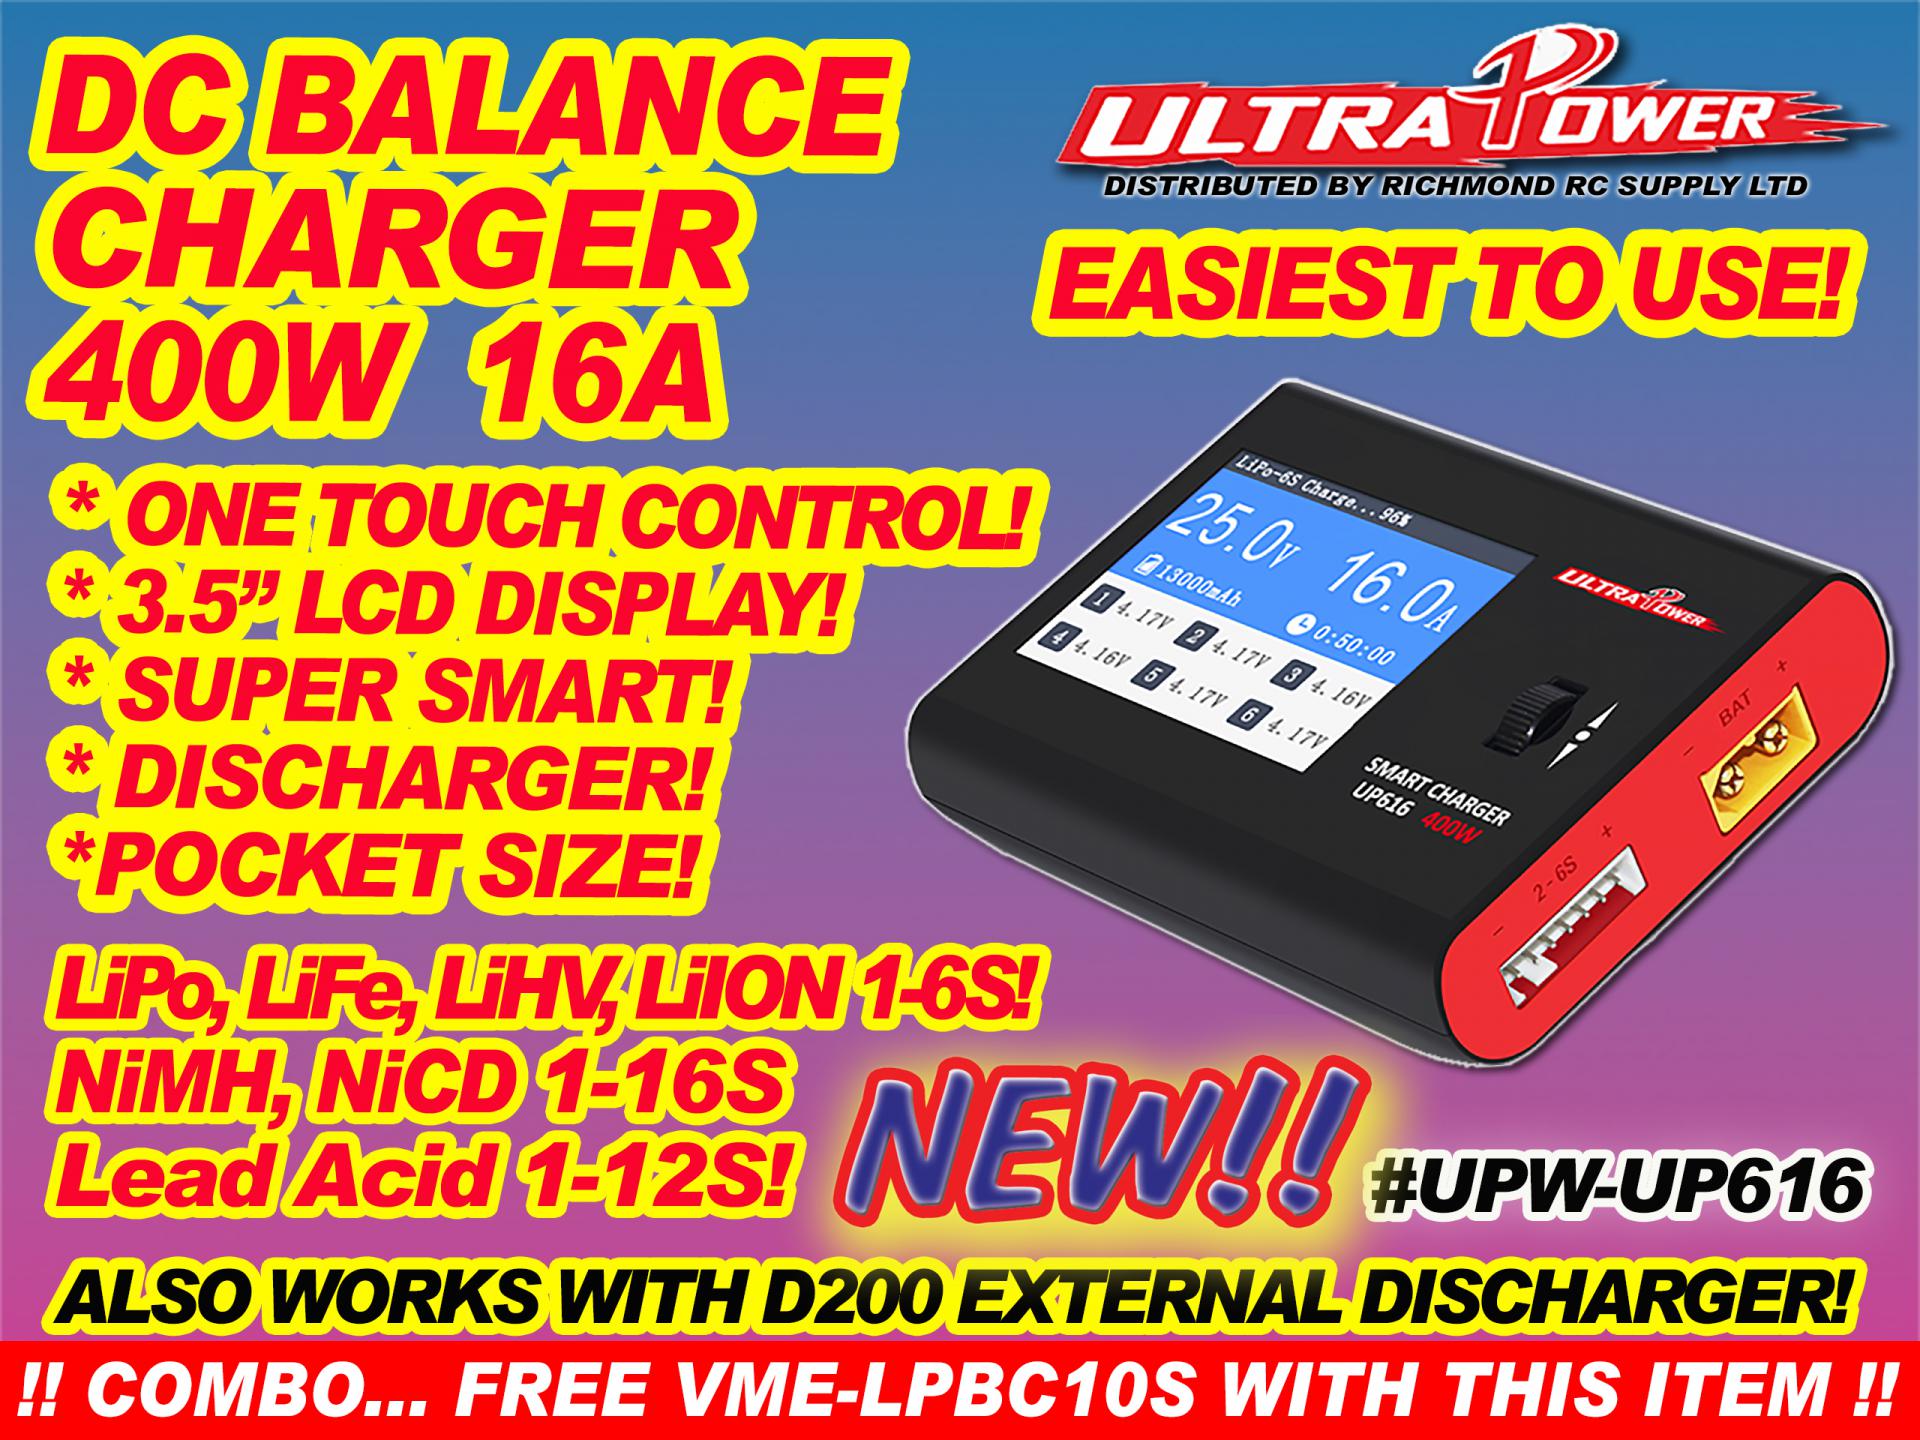 ULTRA POWER CHARGER - DC, 400W 16A w/TFT SCREEN x1